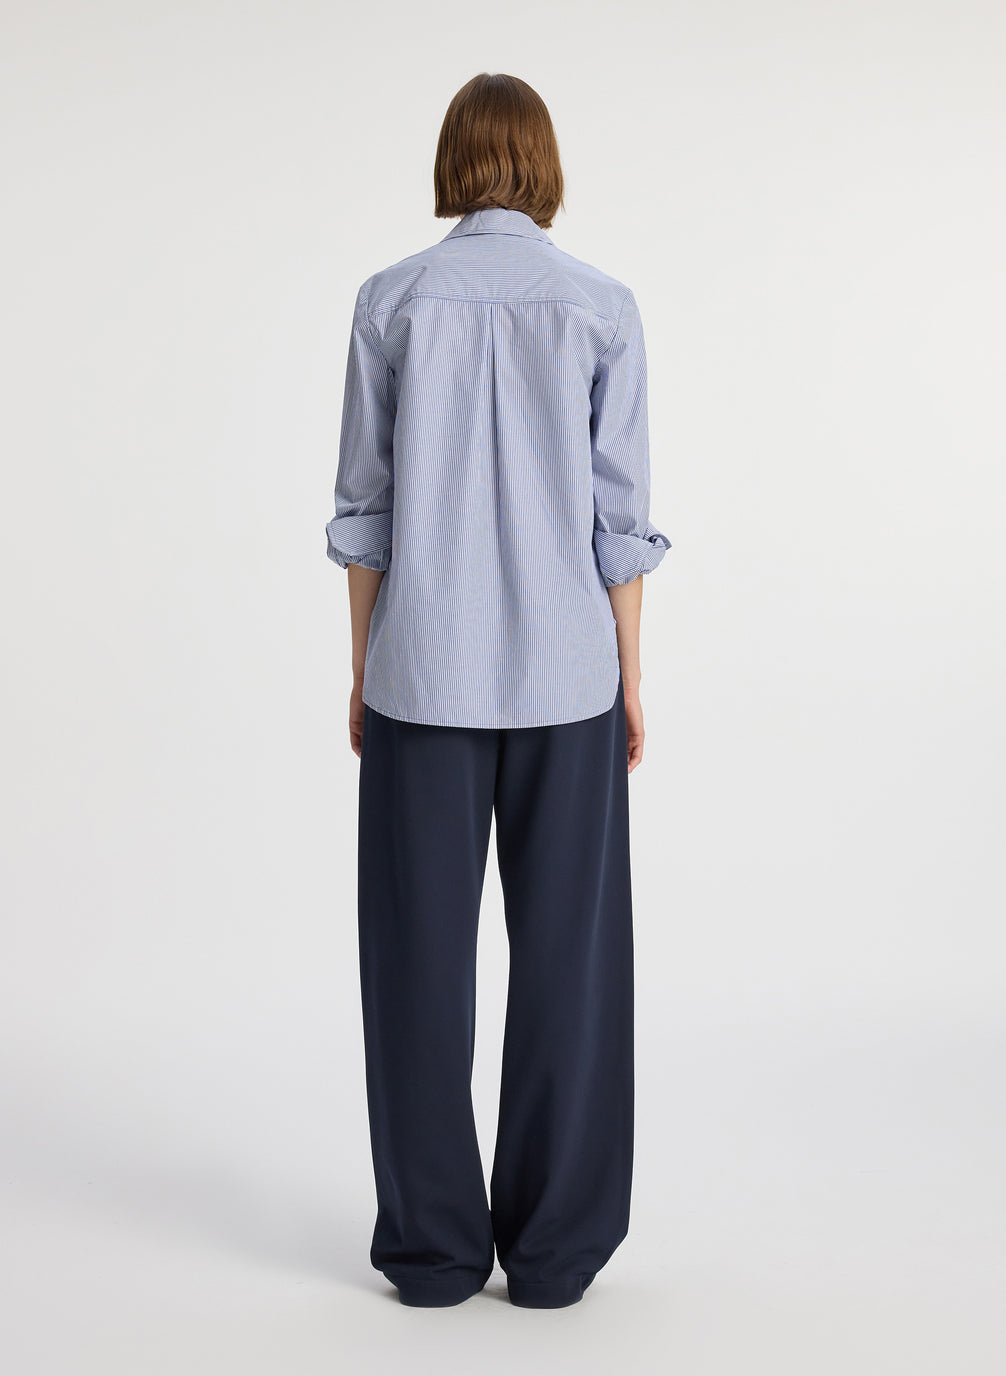 back view of woman wearing blue striped button down collared shirt and navy blue pants